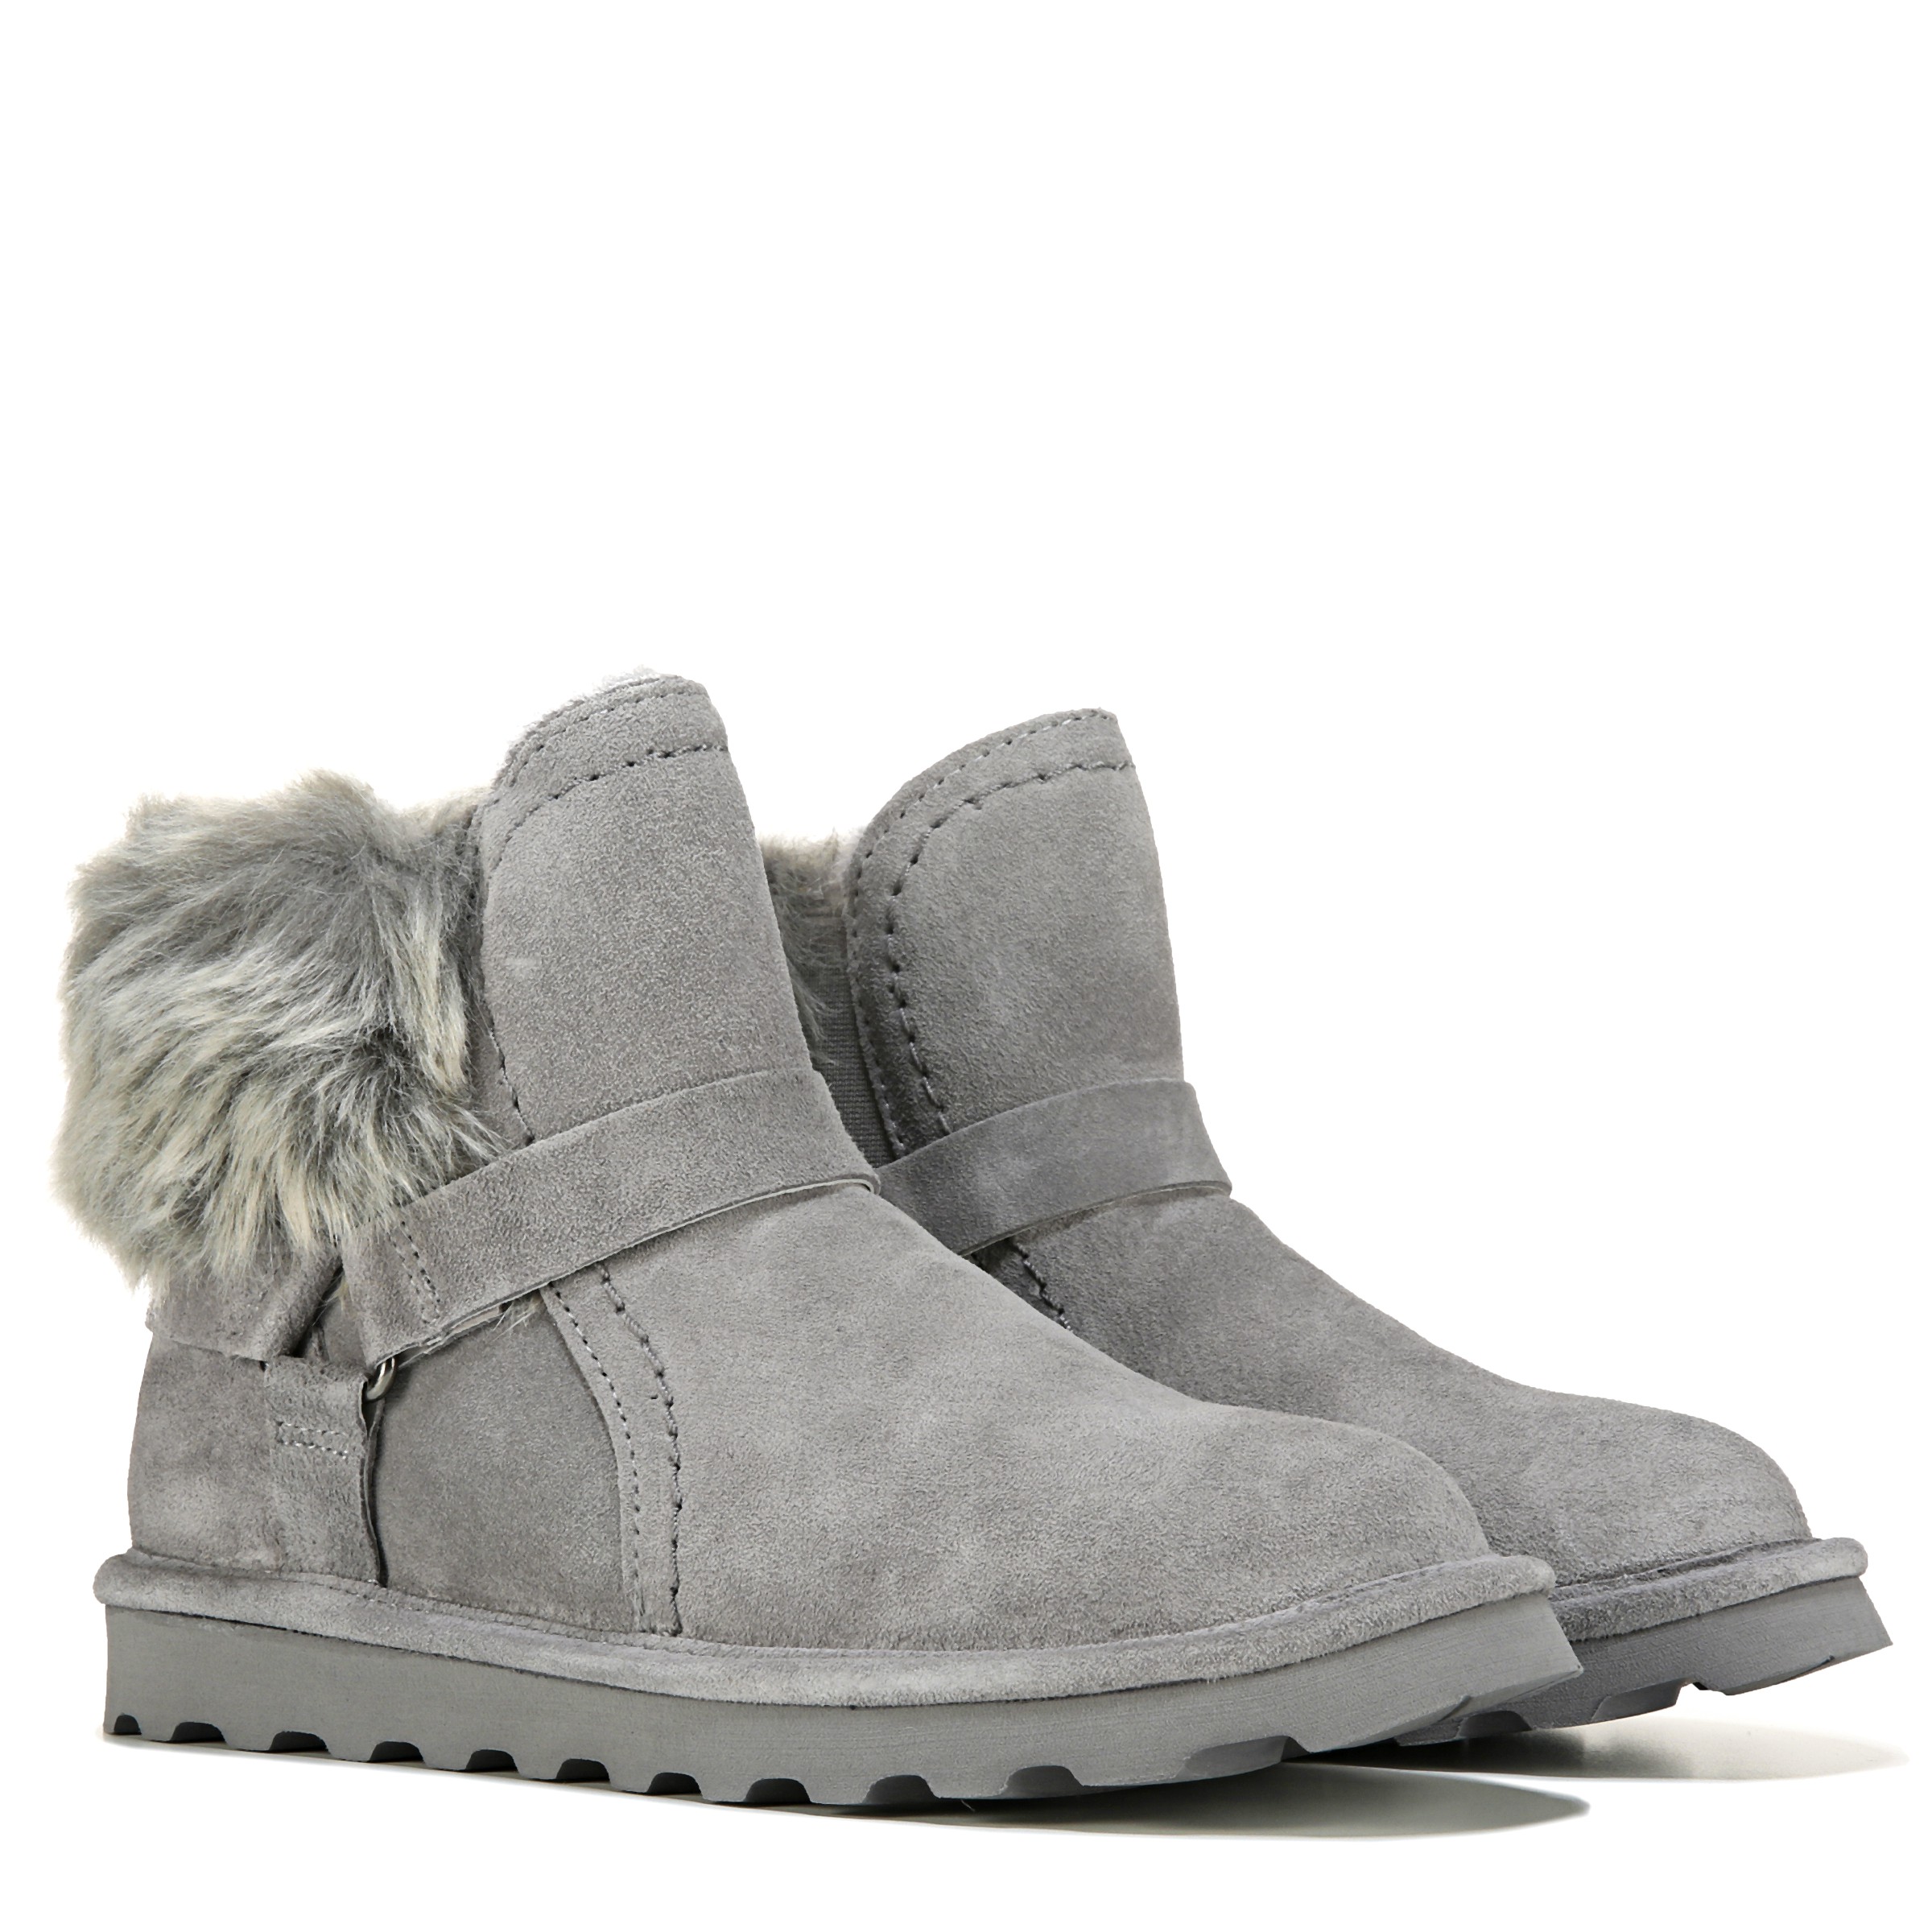 A closer look at the bear paw boots as seen on the @louisvuitton